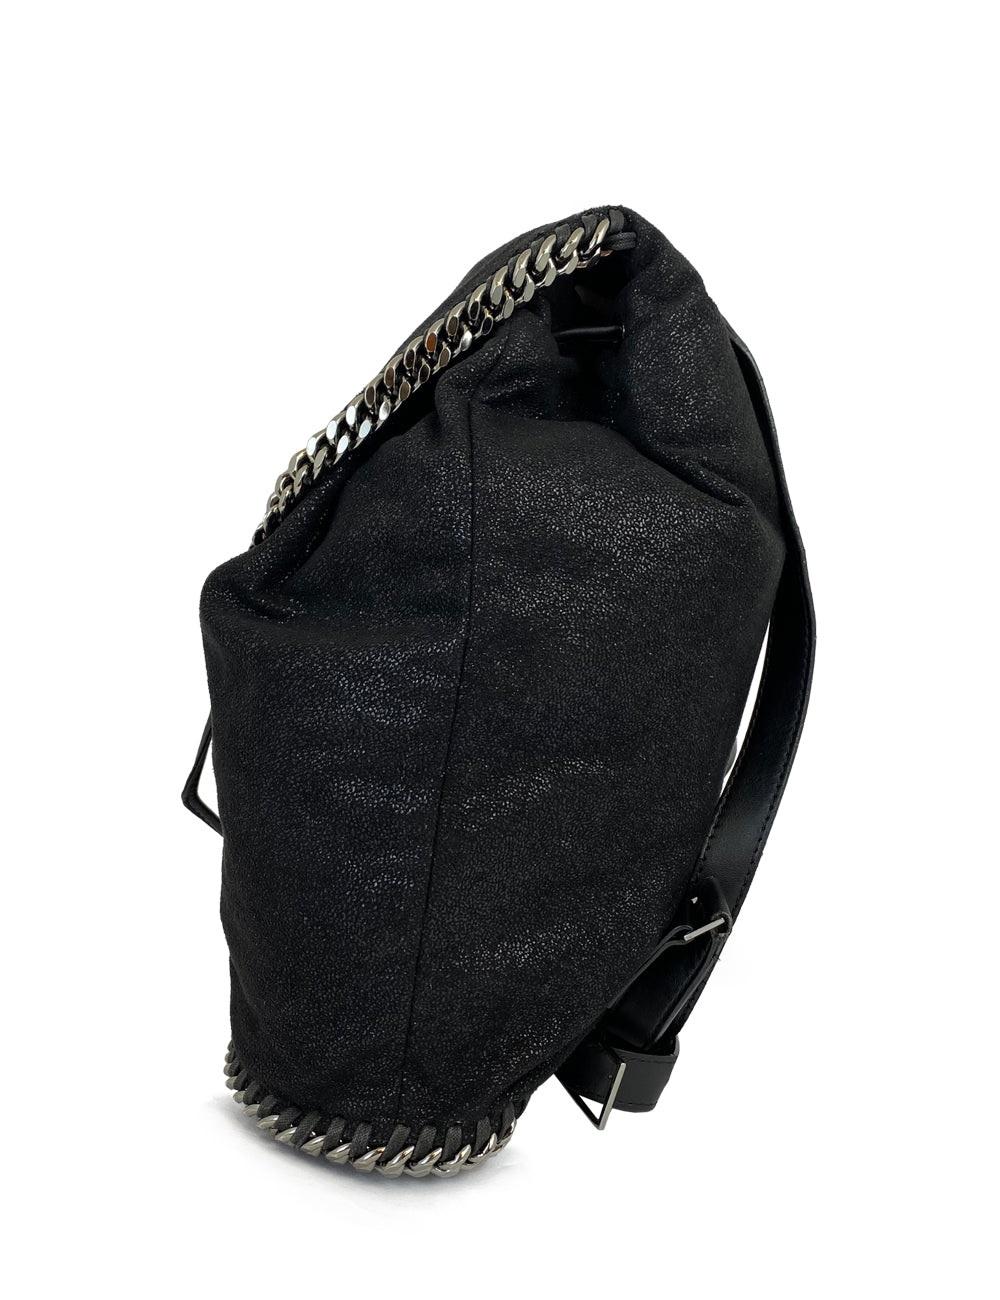 Black Stella McCartney satchel backpack. Featuring animal-friendly faux black leather with a metallic sheen. Signature Falabella chain incorporated throughout the edges of the bag, lengthy leather shoulder straps with adjustment buckles, and a top